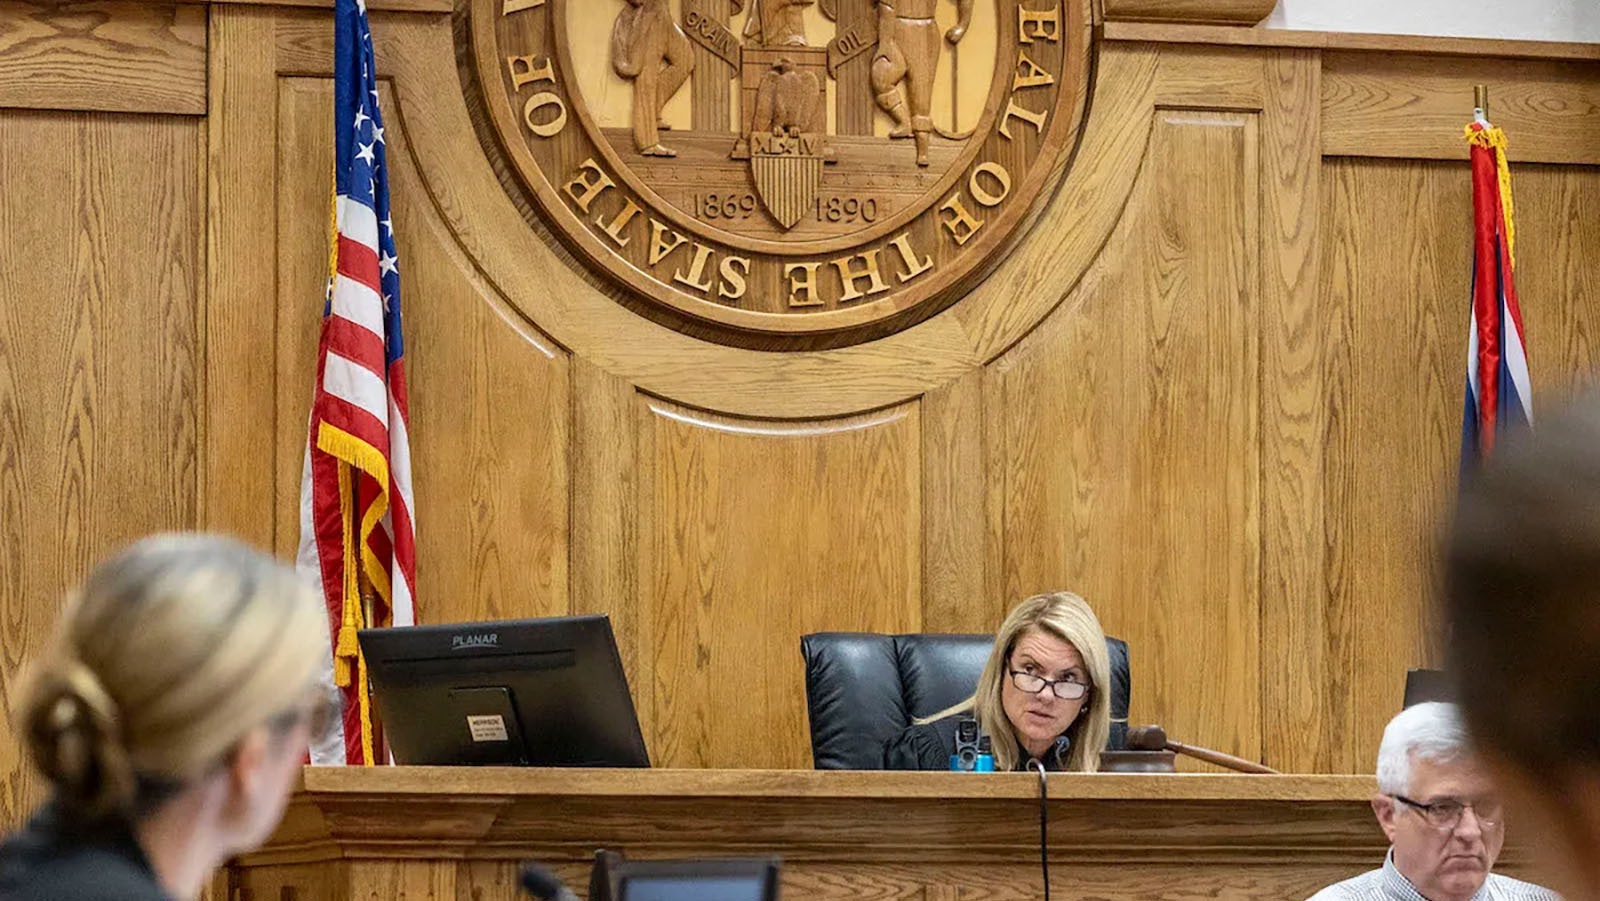 Teton County District Court Judge Melissa Owens speaks during a hearing where she denied a request by lawmakers, Wyoming Secretary of State Chuck Gray and Right to Life Wyoming to defend the laws that ban most abortions in the state. A proposed law would make it illegal to specifically threaten or intimidate a judge.